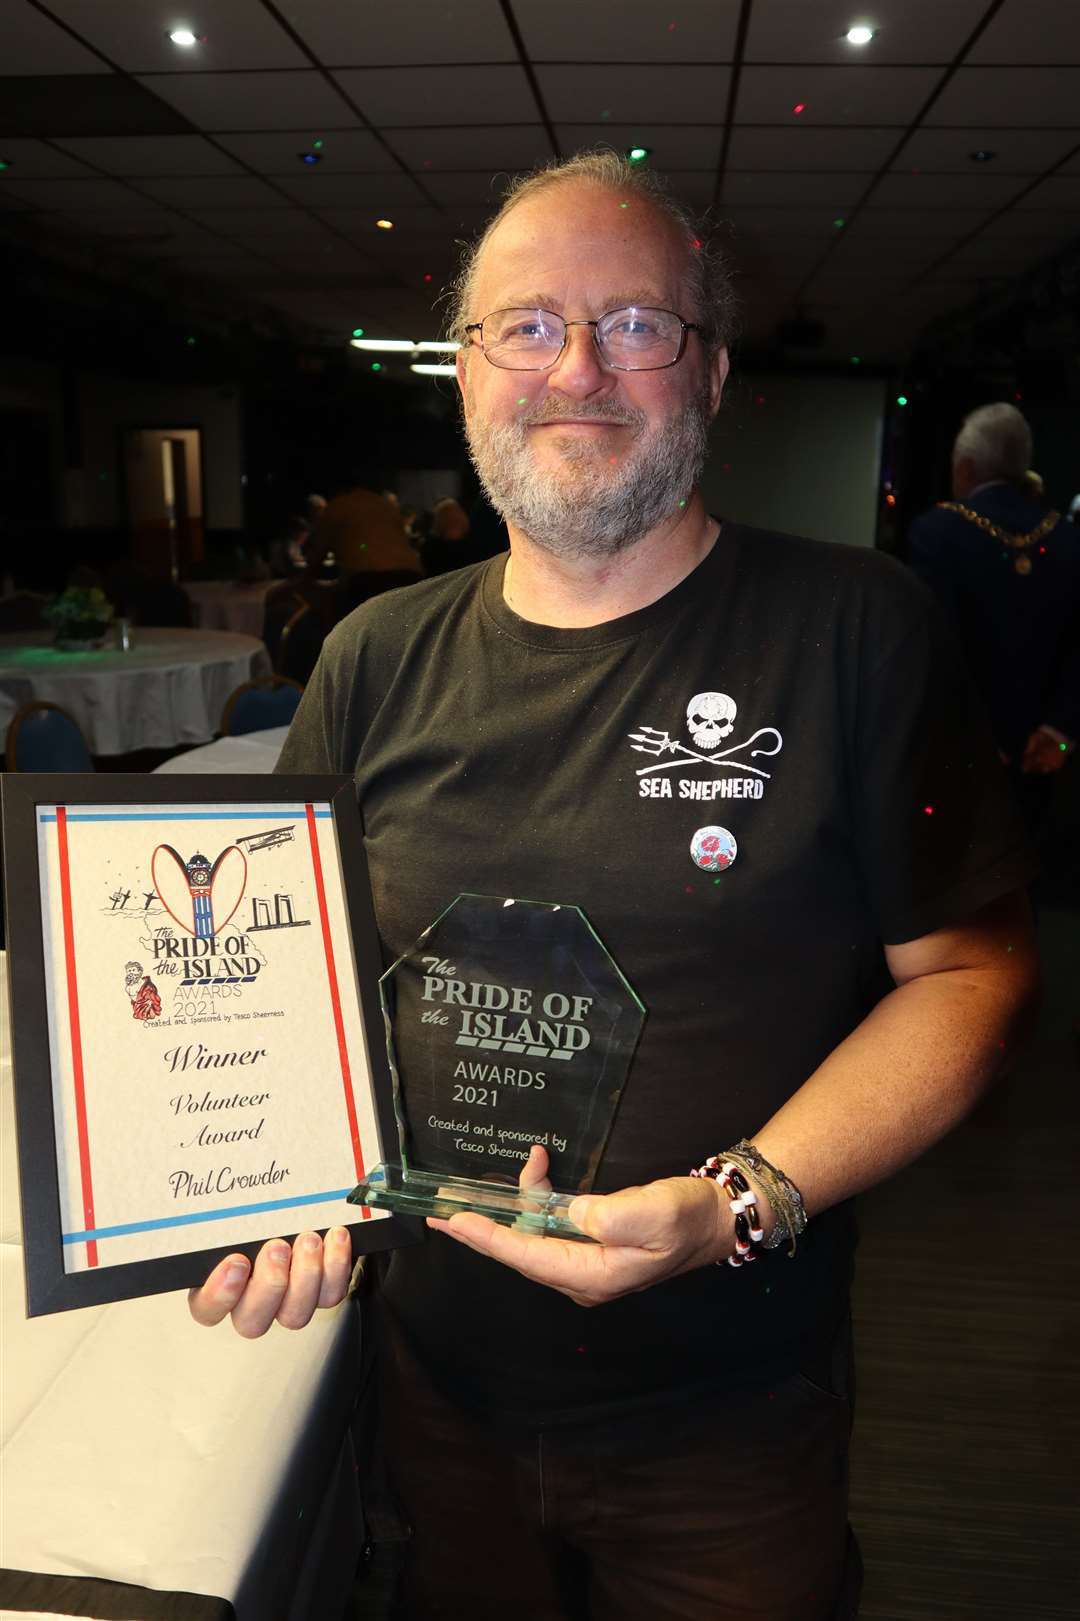 Phil Crowder was named volunteer of the year in the Tesco Pride of the Island awards at Layzells, Minster